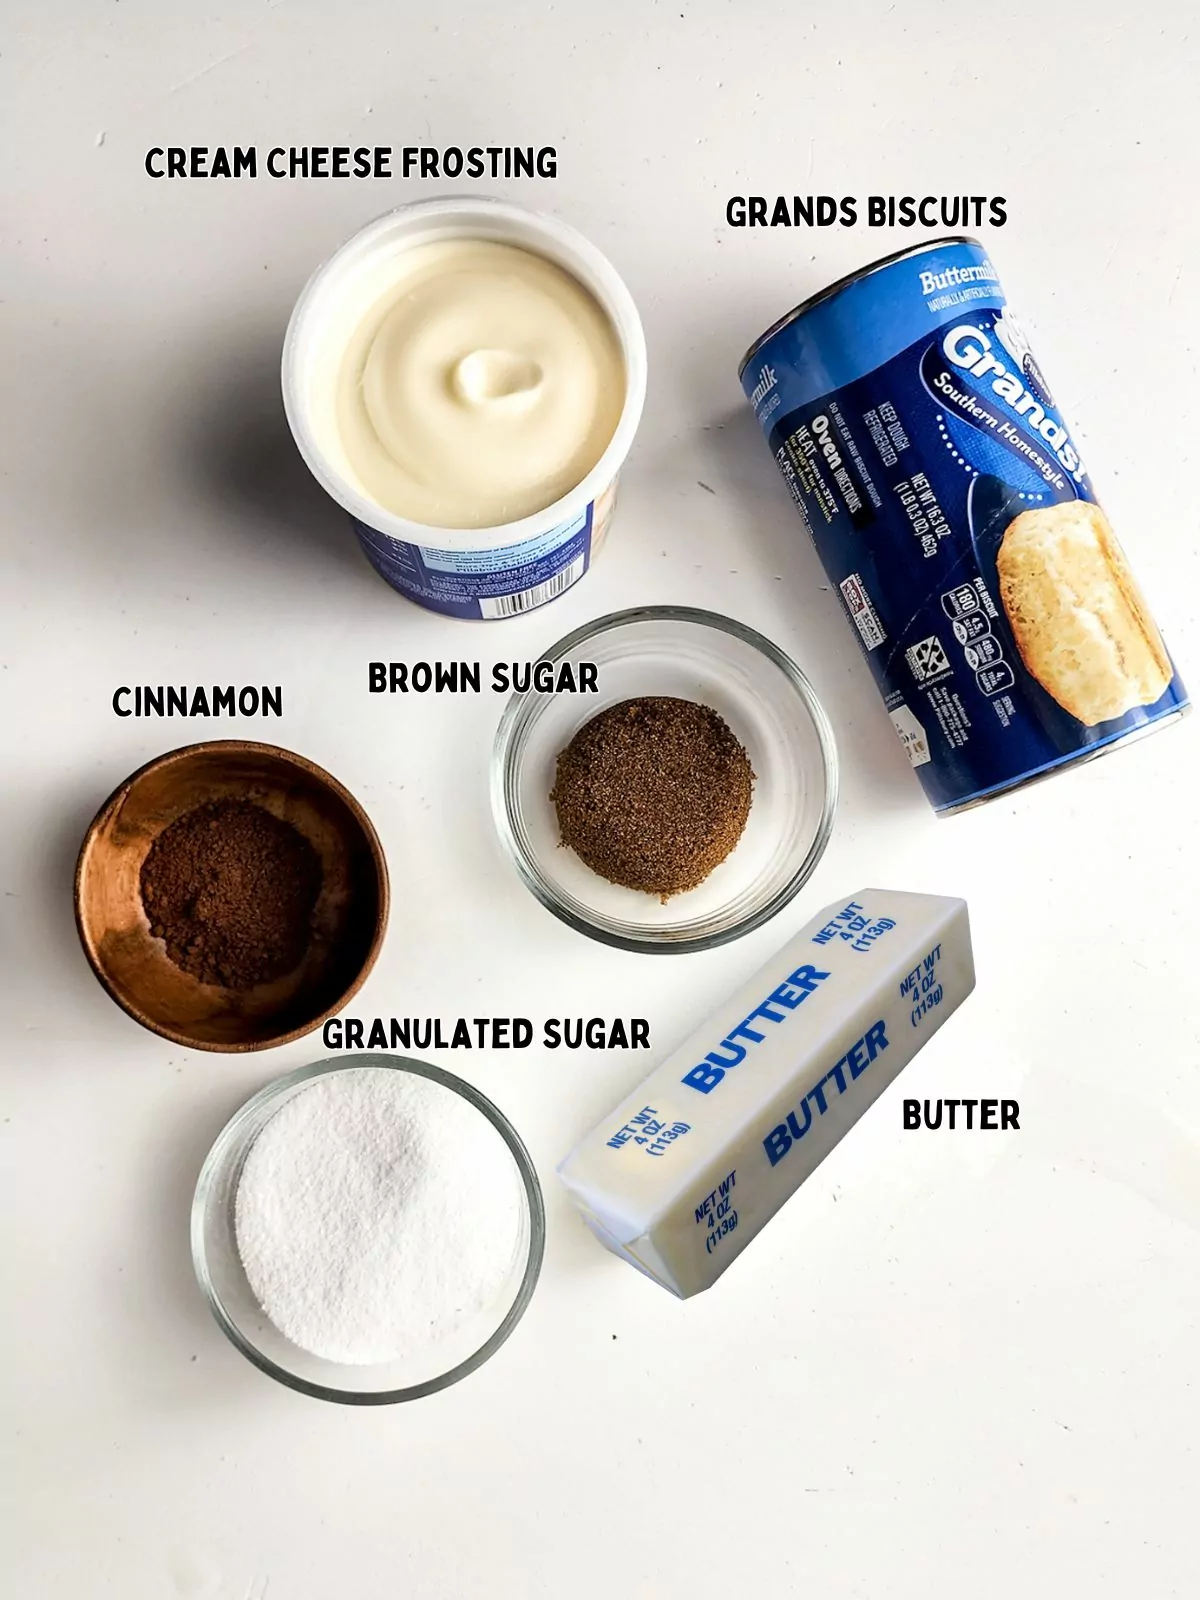 Ingredients for cinnamon rolls made with Grands Biscuits.